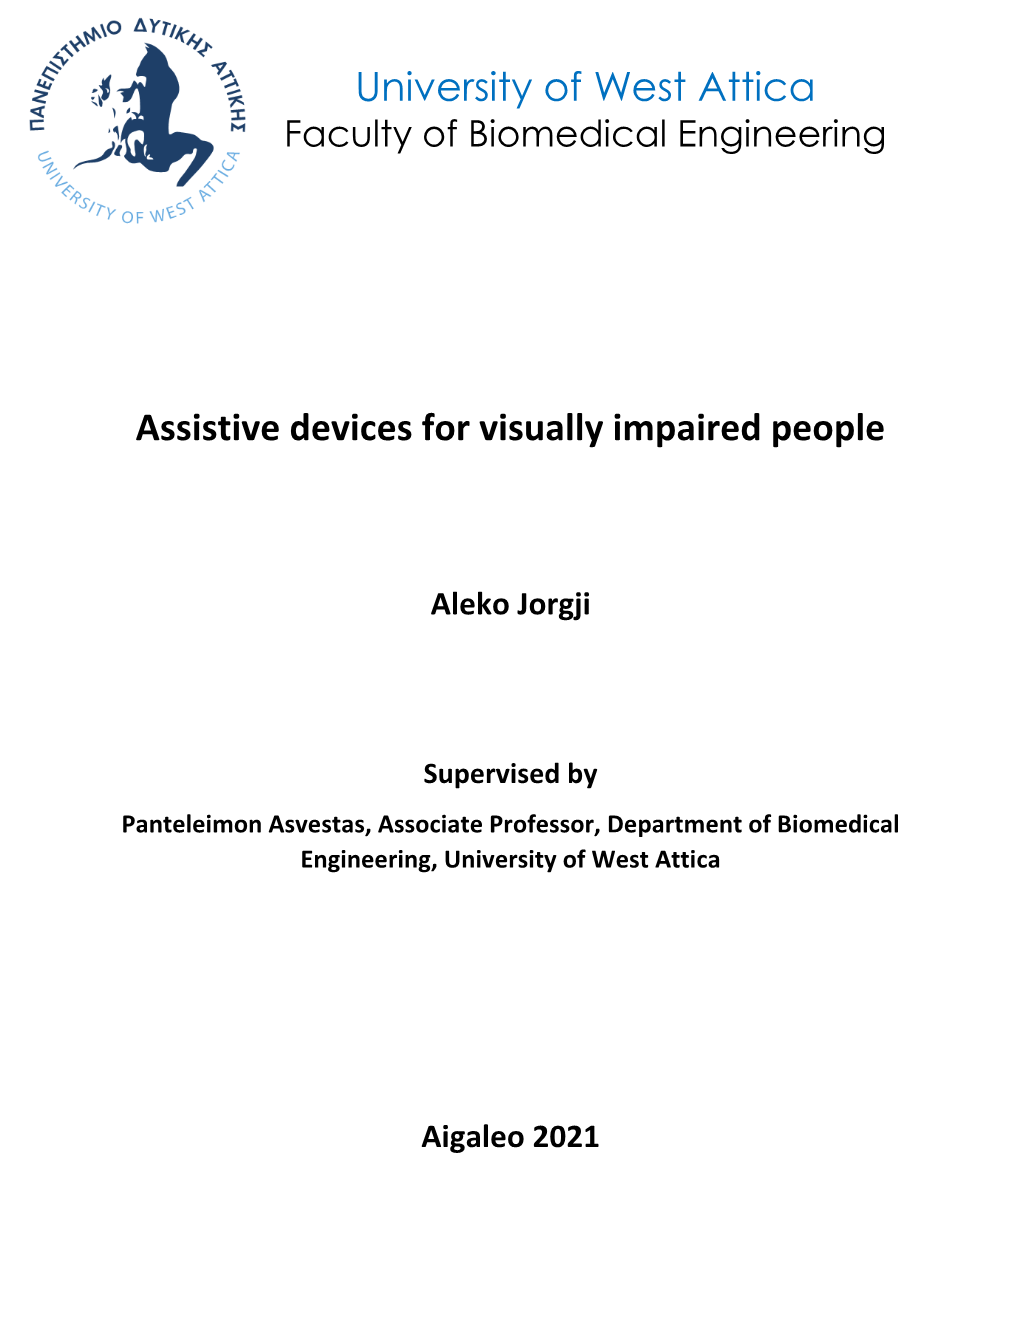 Assistive Devices for Visually Impaired People